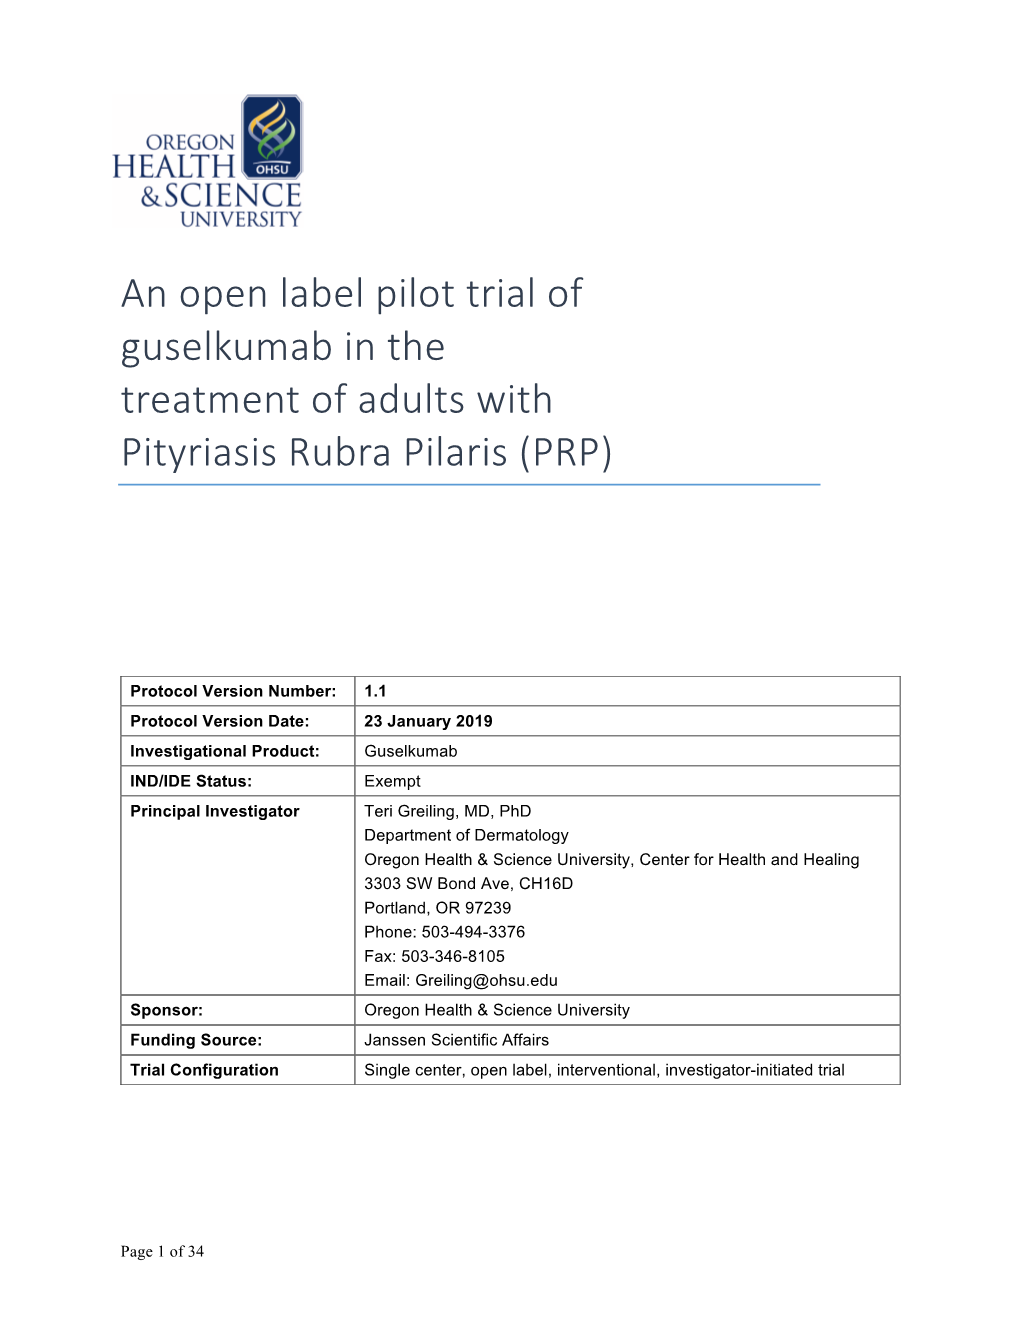 An Open Label Pilot Trial of Guselkumab in the Treatment of Adults with Pityriasis Rubra Pilaris (PRP)